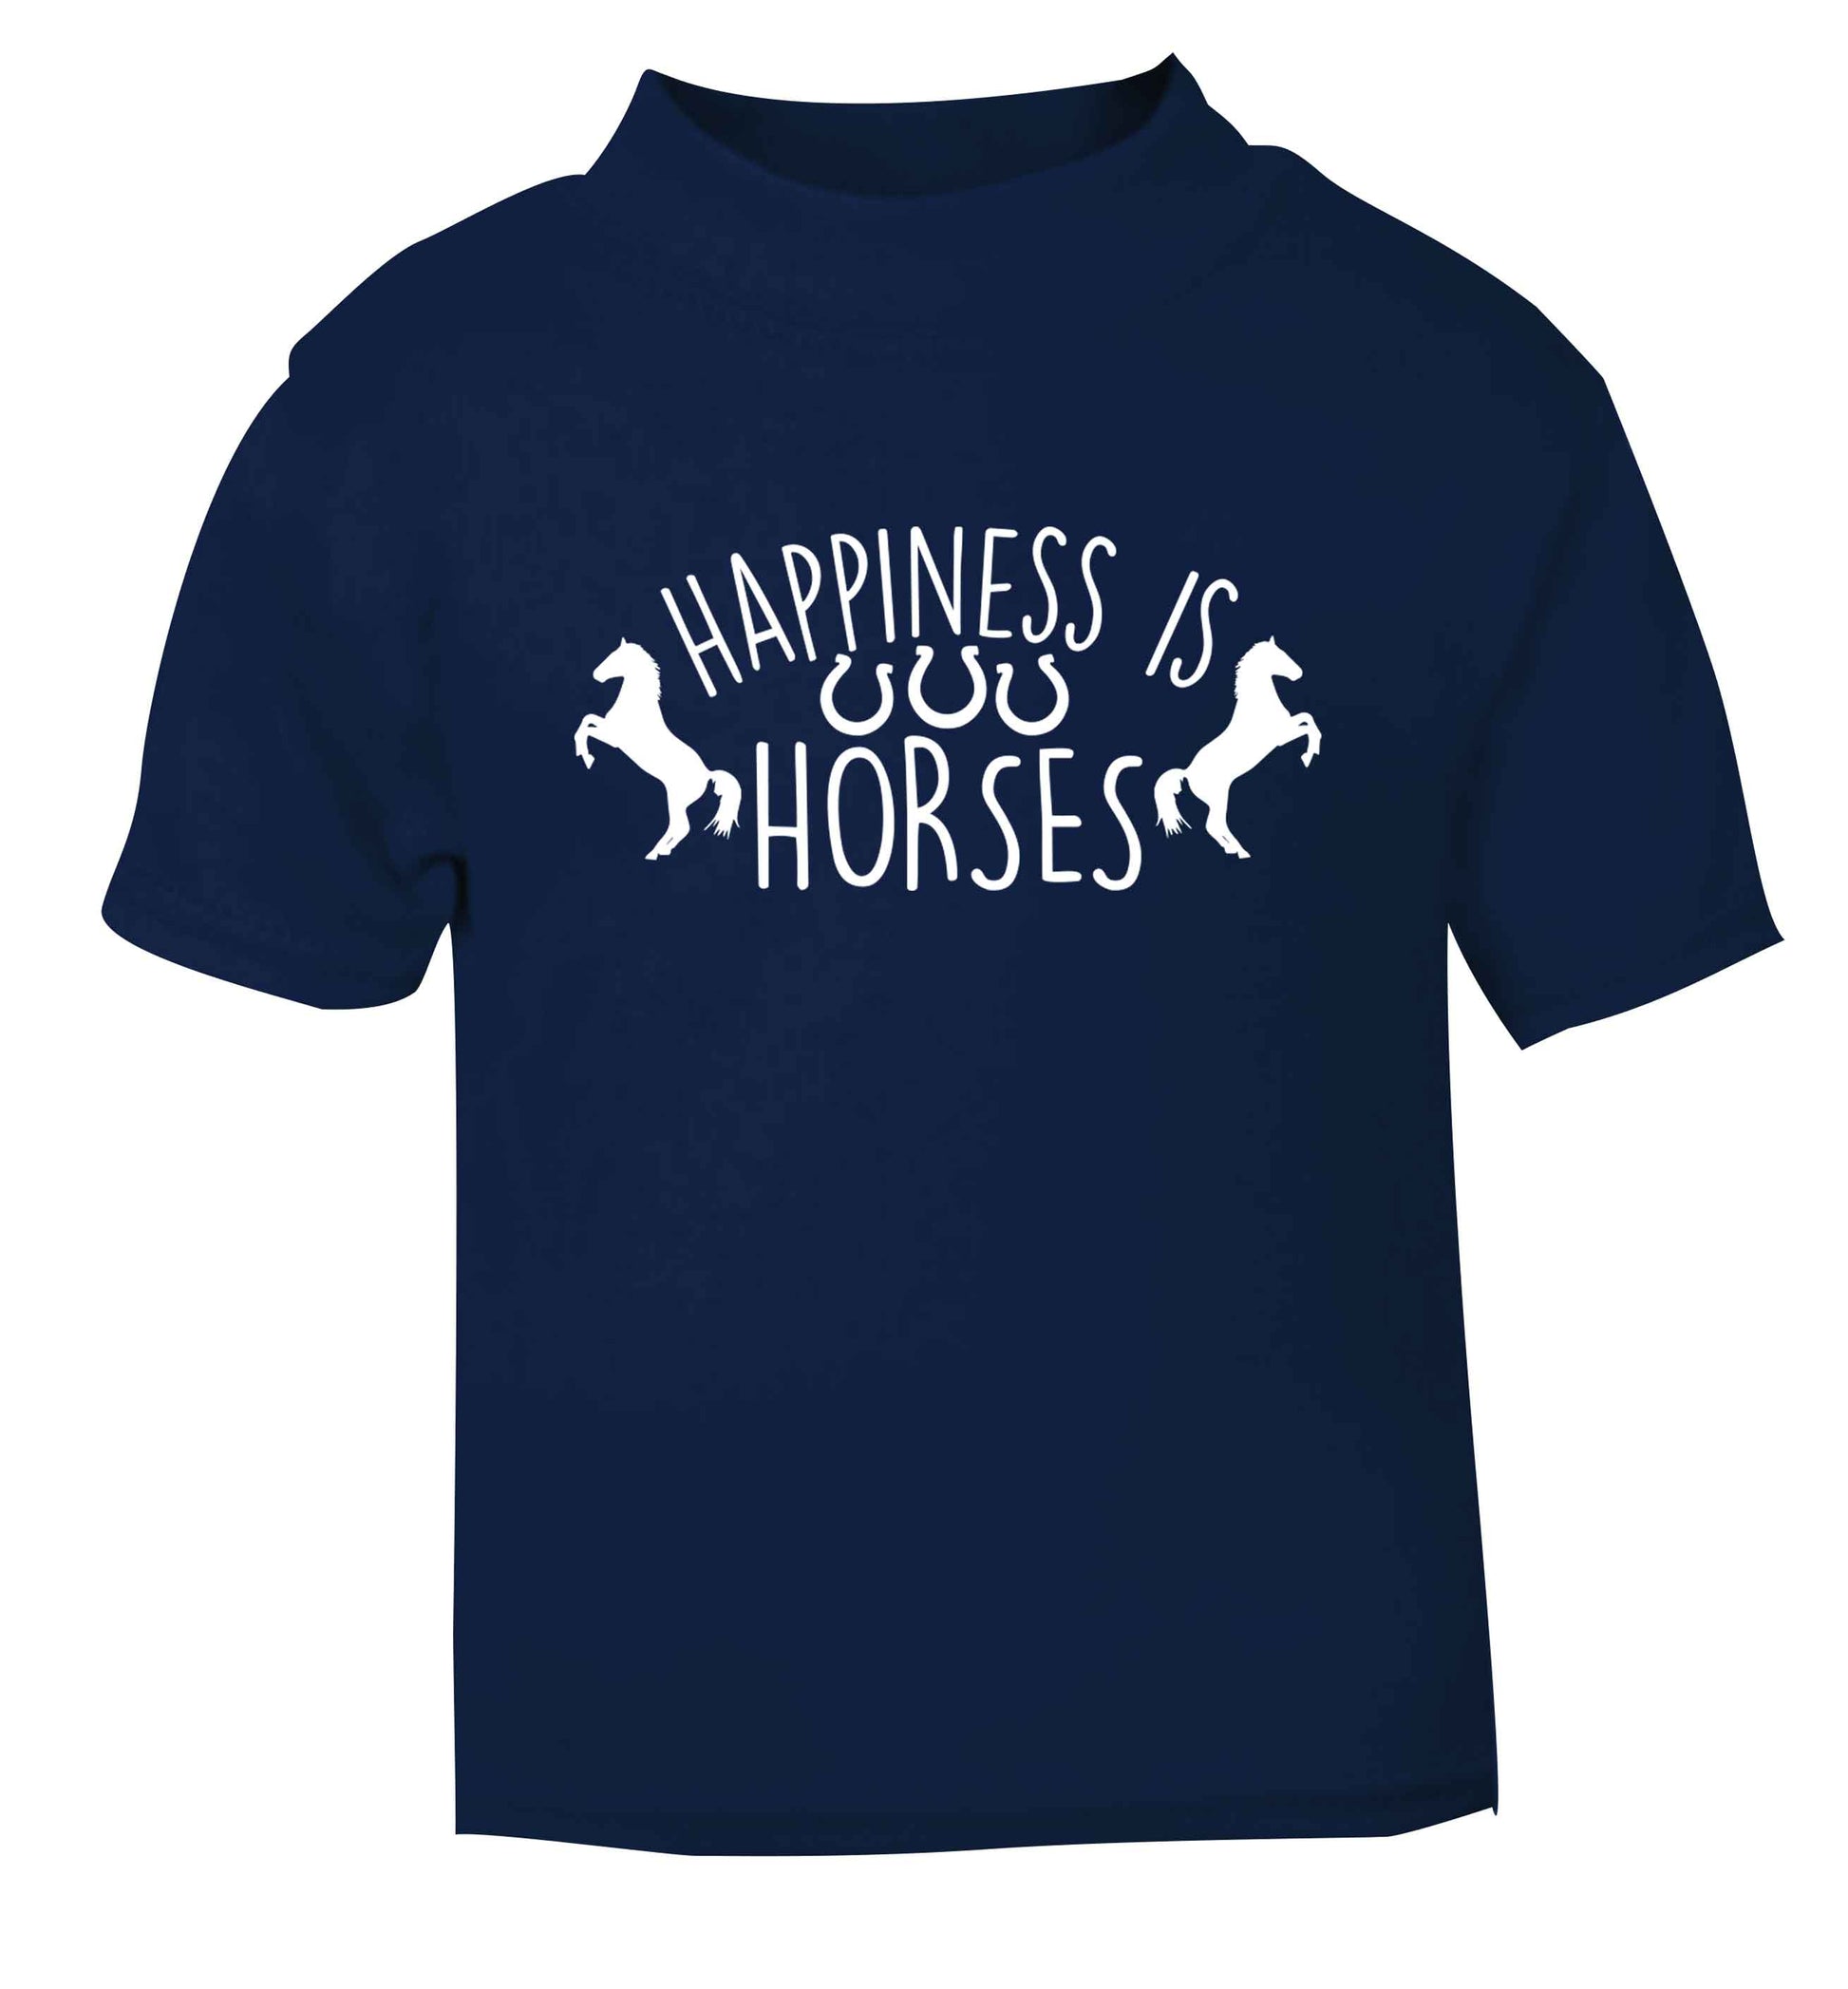 Happiness is horses navy baby toddler Tshirt 2 Years